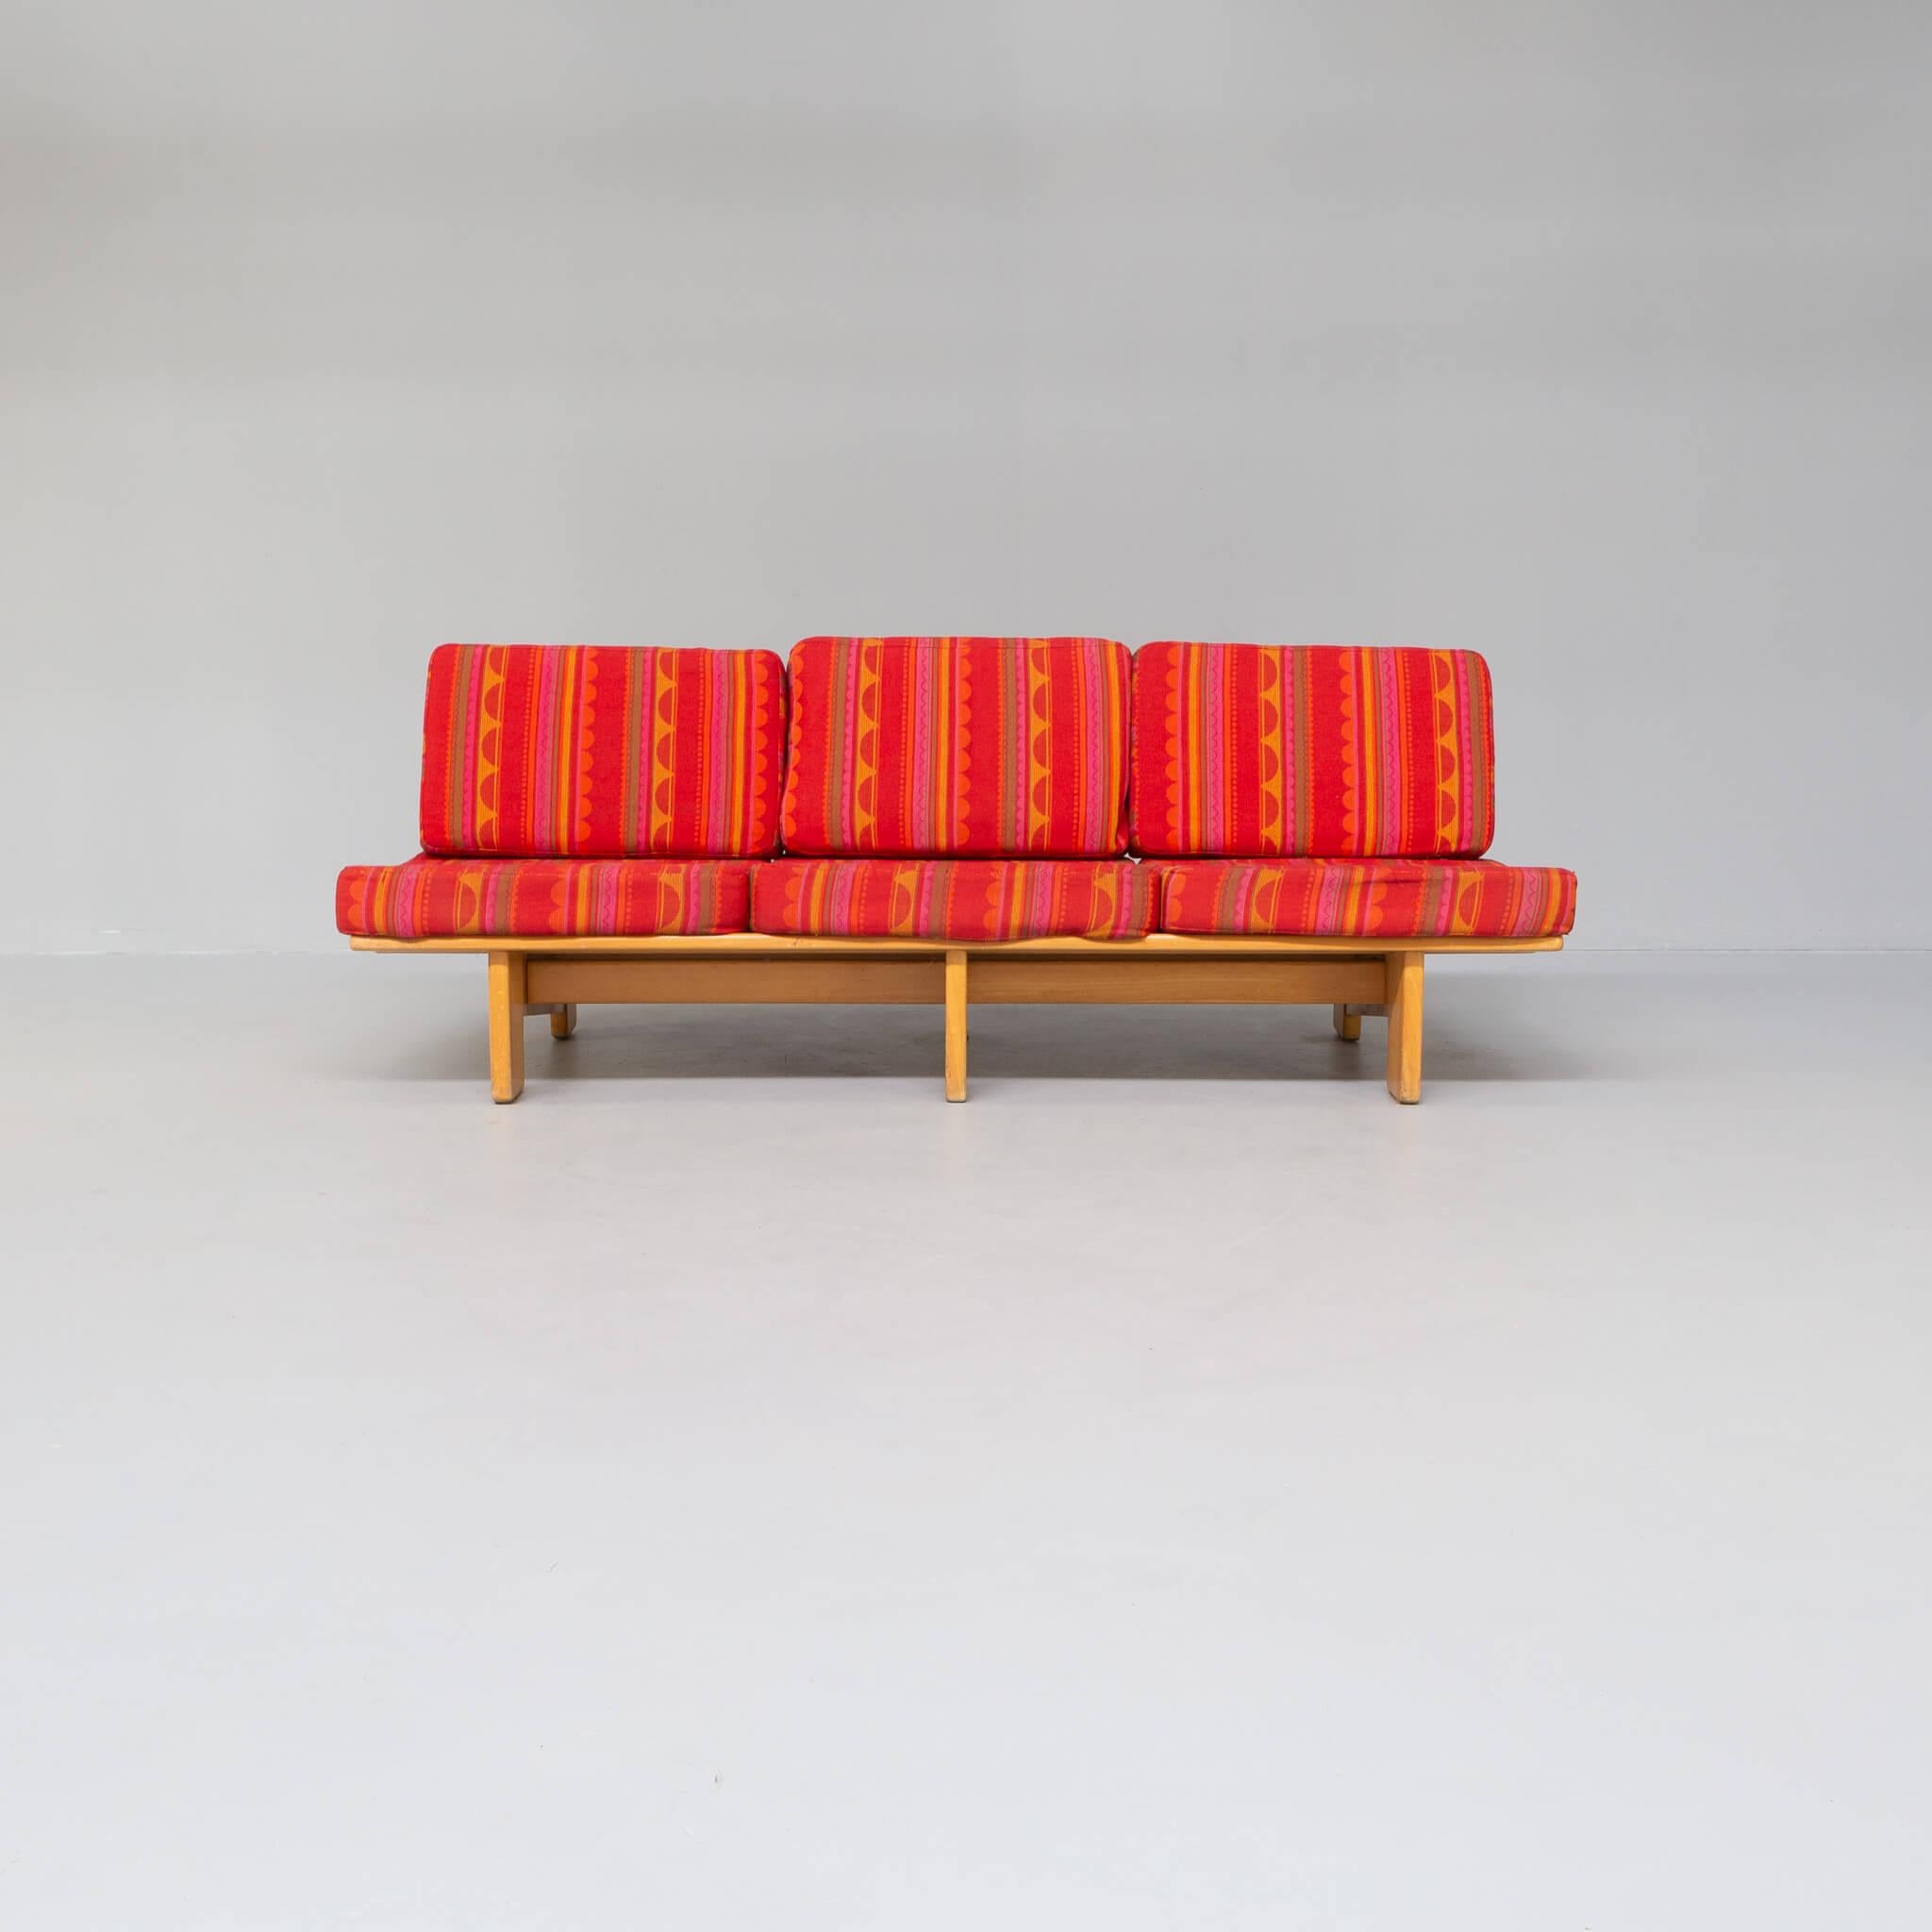 Low seat sofas or chairs have in common is the feeling connecting with earth but also it gives a most relaxing feeling. Like you sit down and want to stay for hours. Due to this human instict the japanese designers in midcentury design choose for